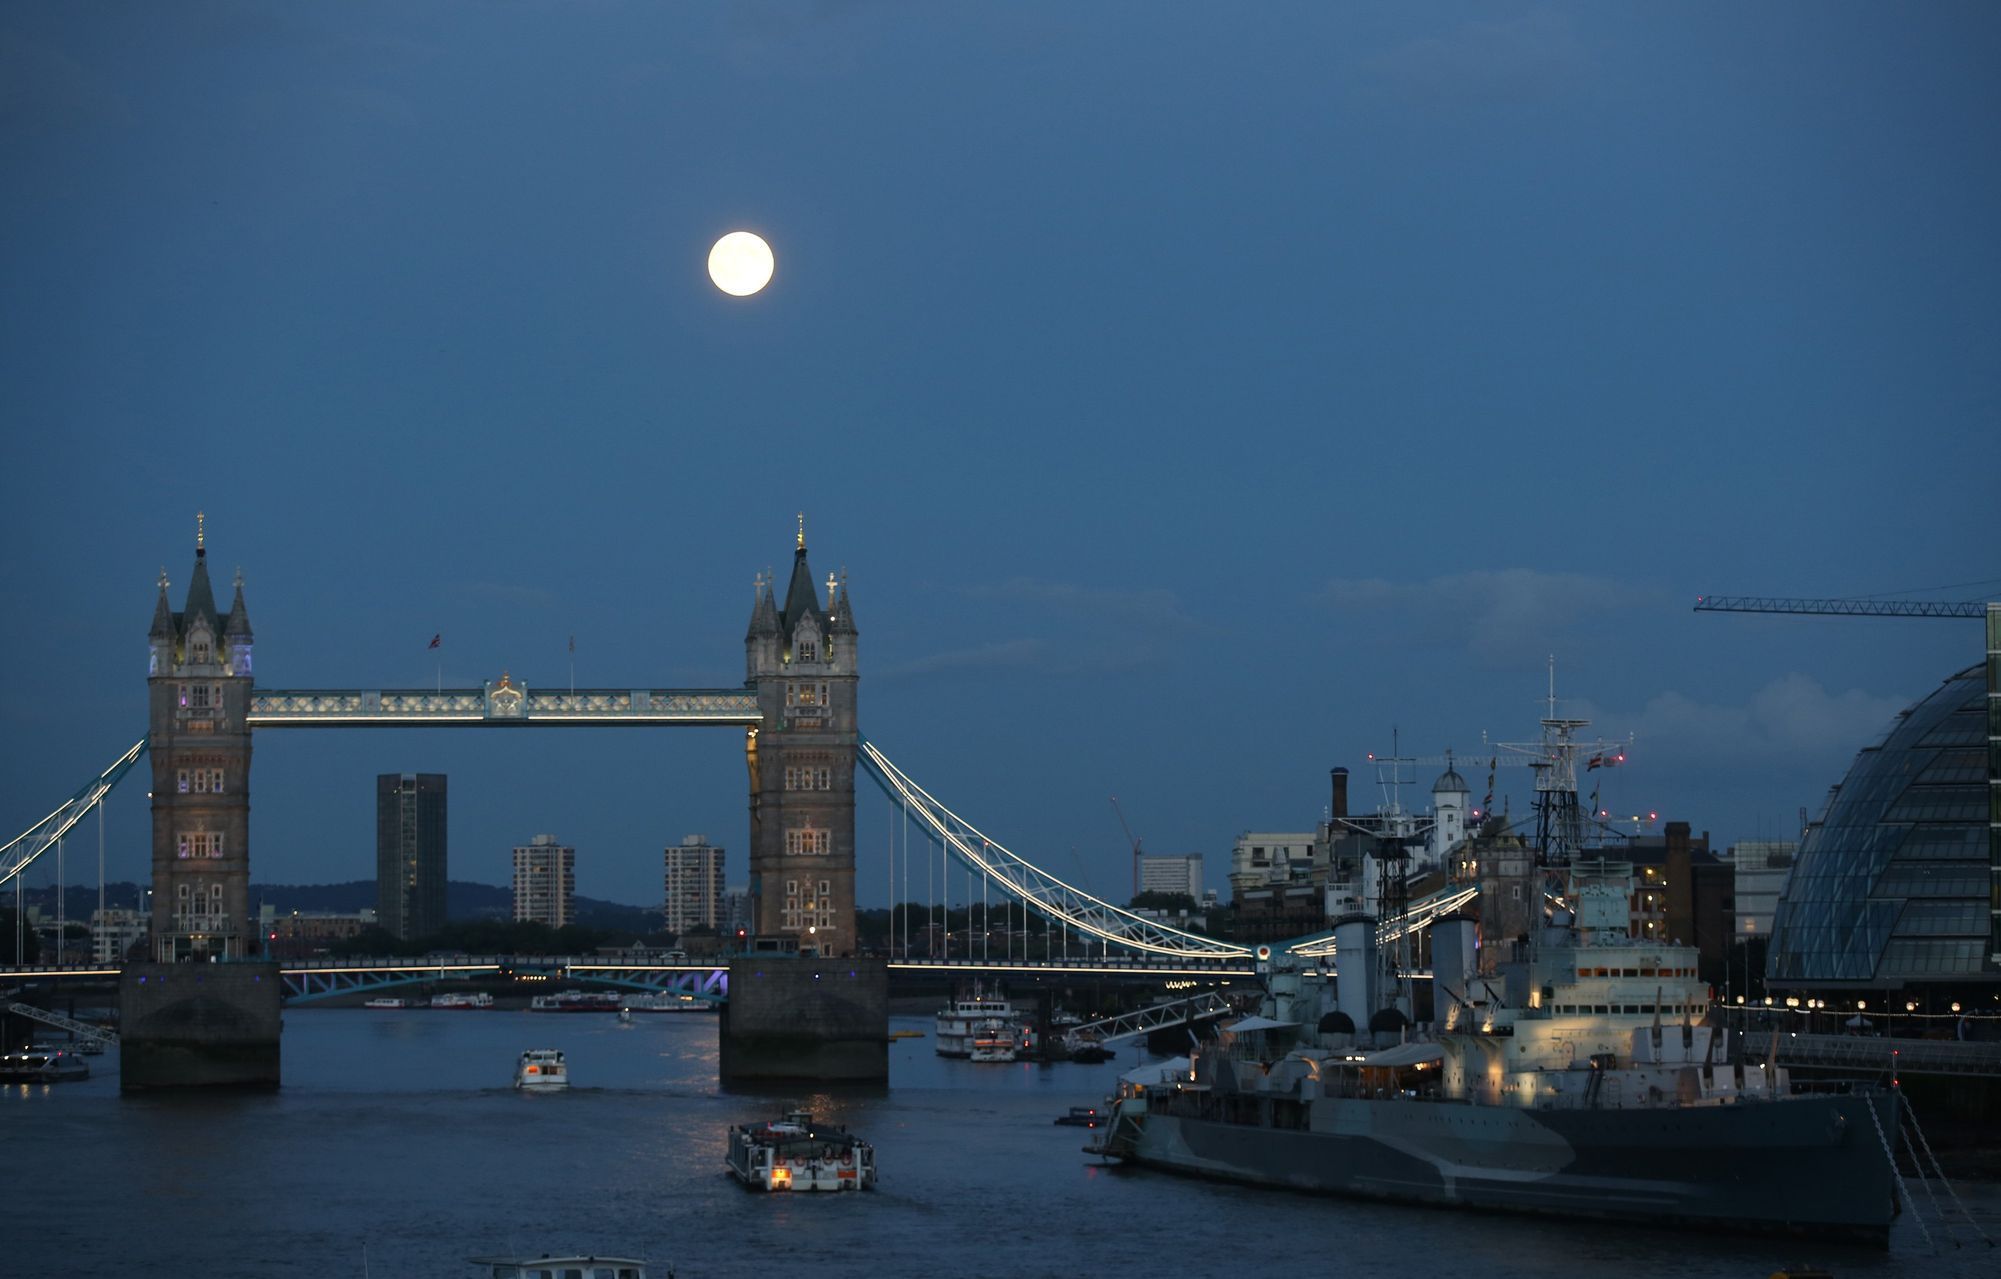 The supermoon rises over Tower Bridge in London